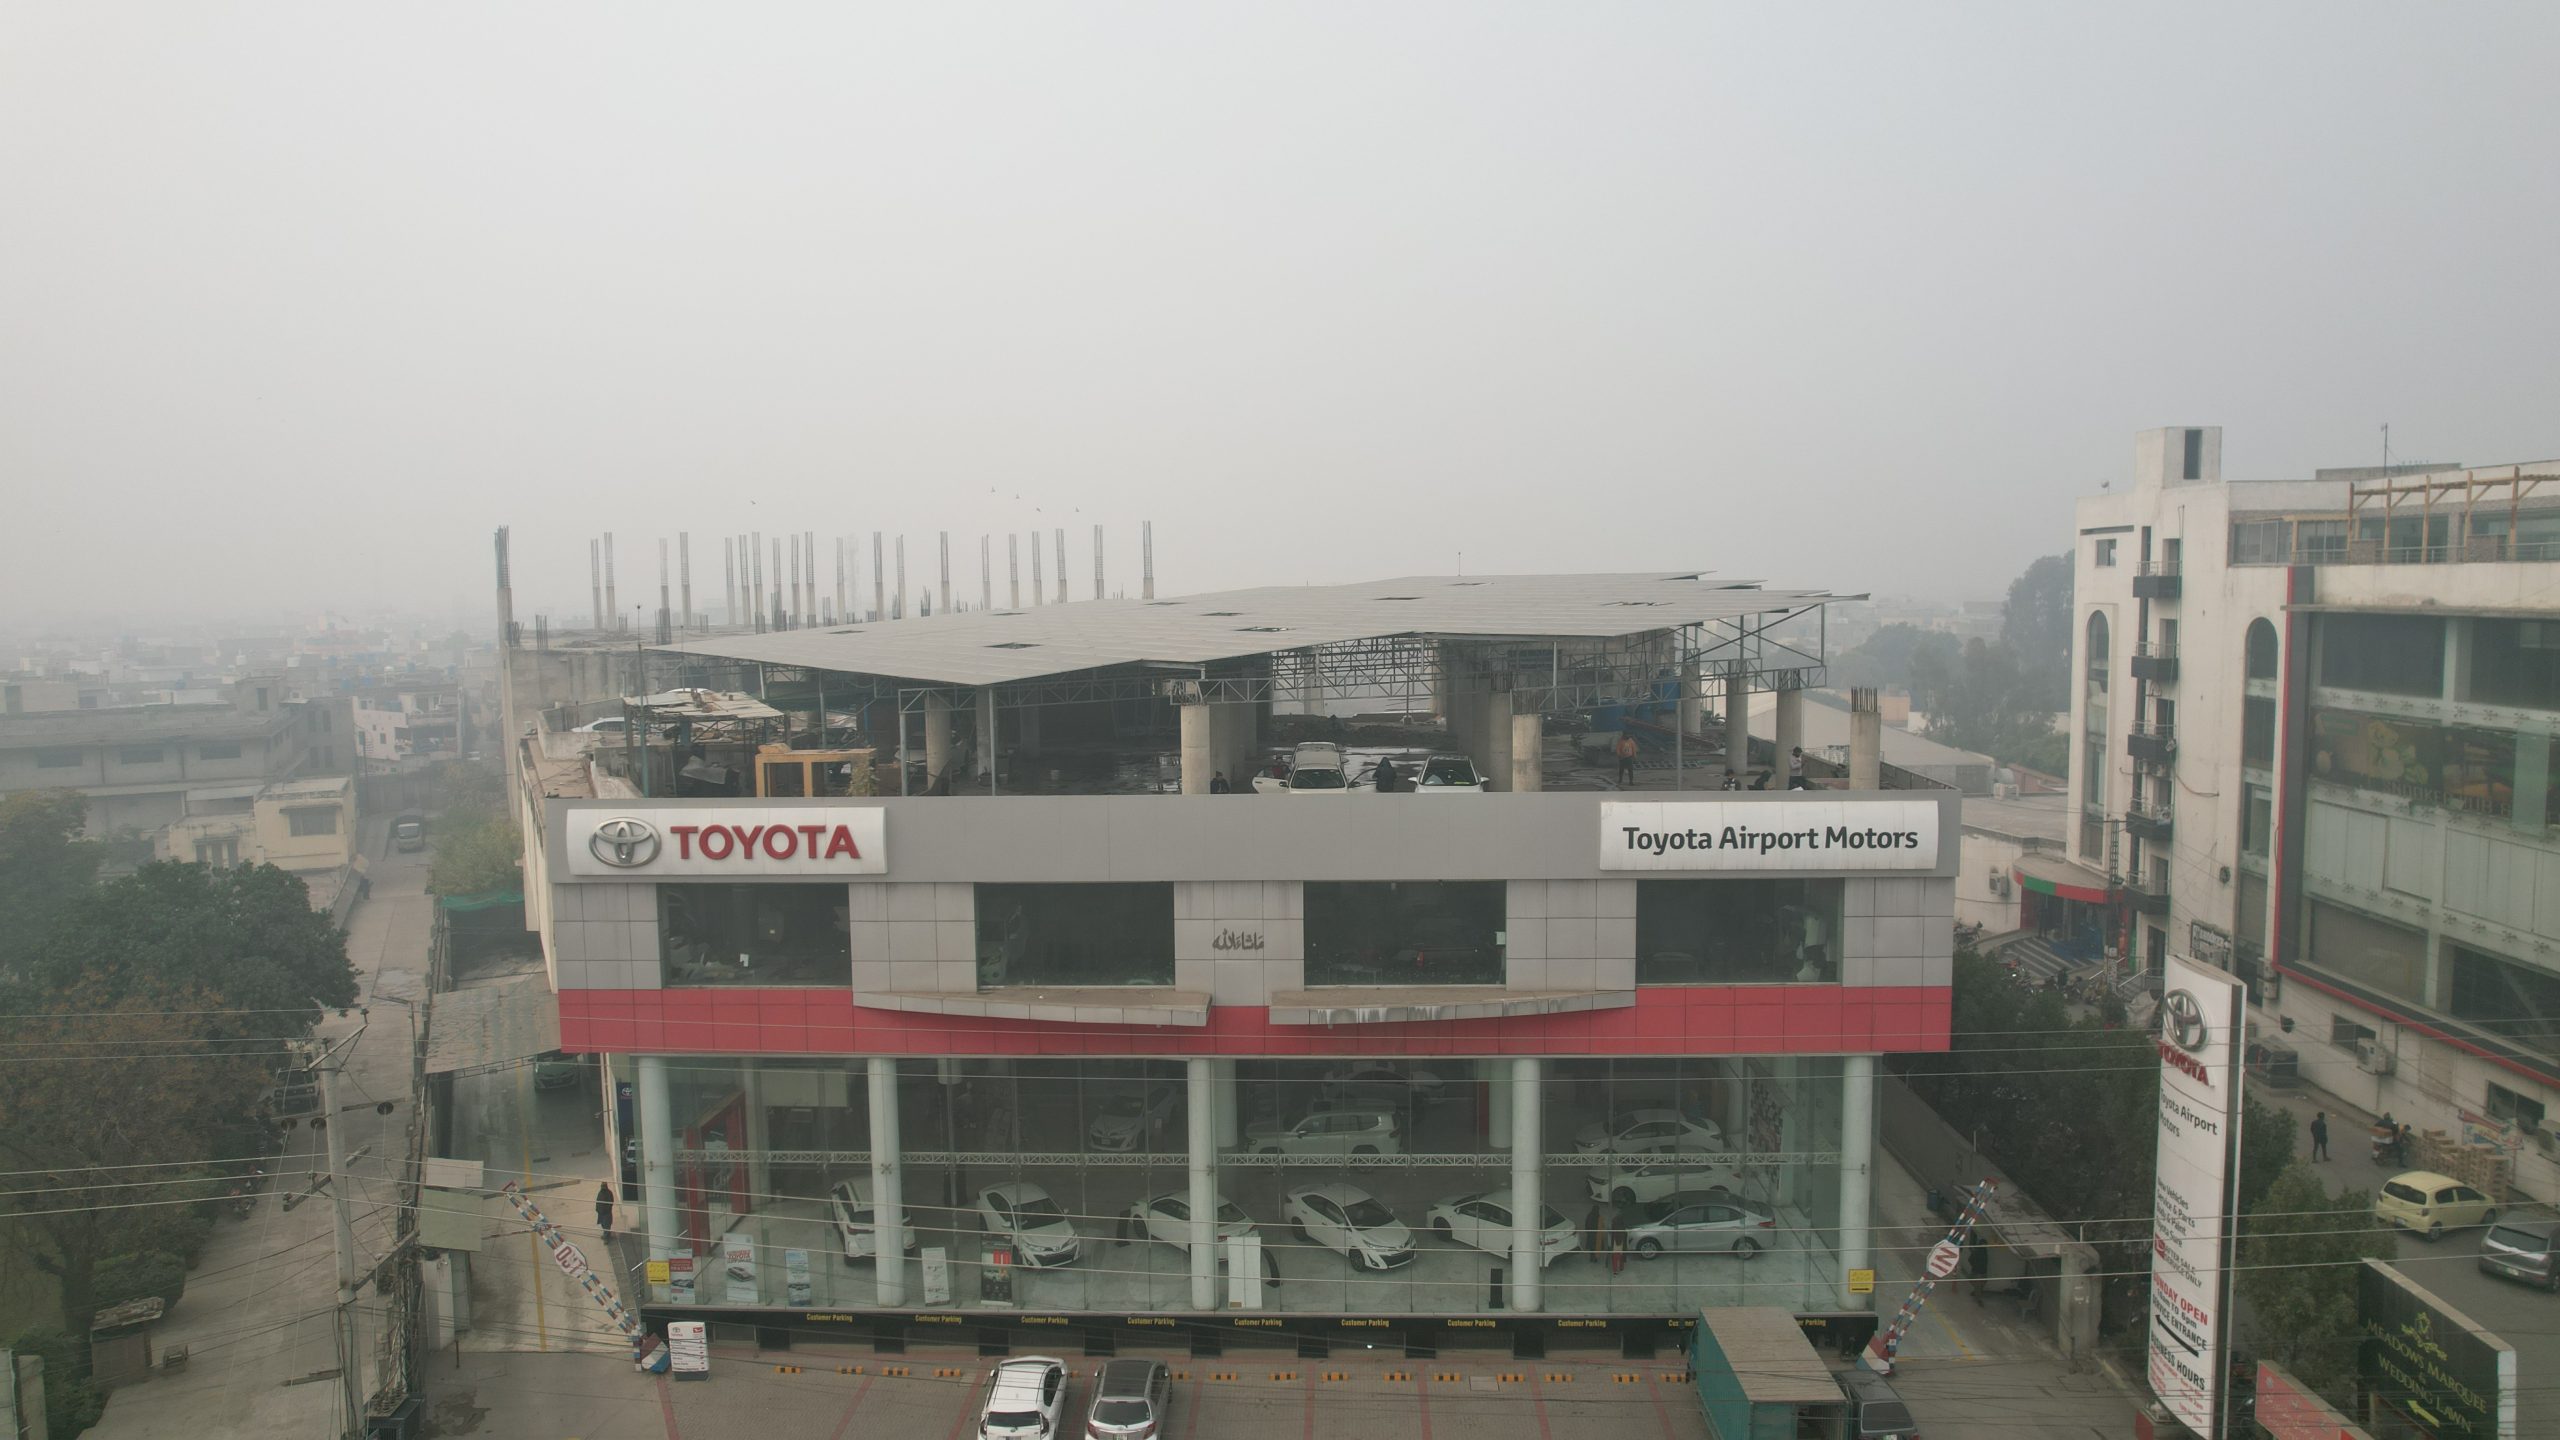 Sympl energy solarised the showroom building of Toyota Airport Motors